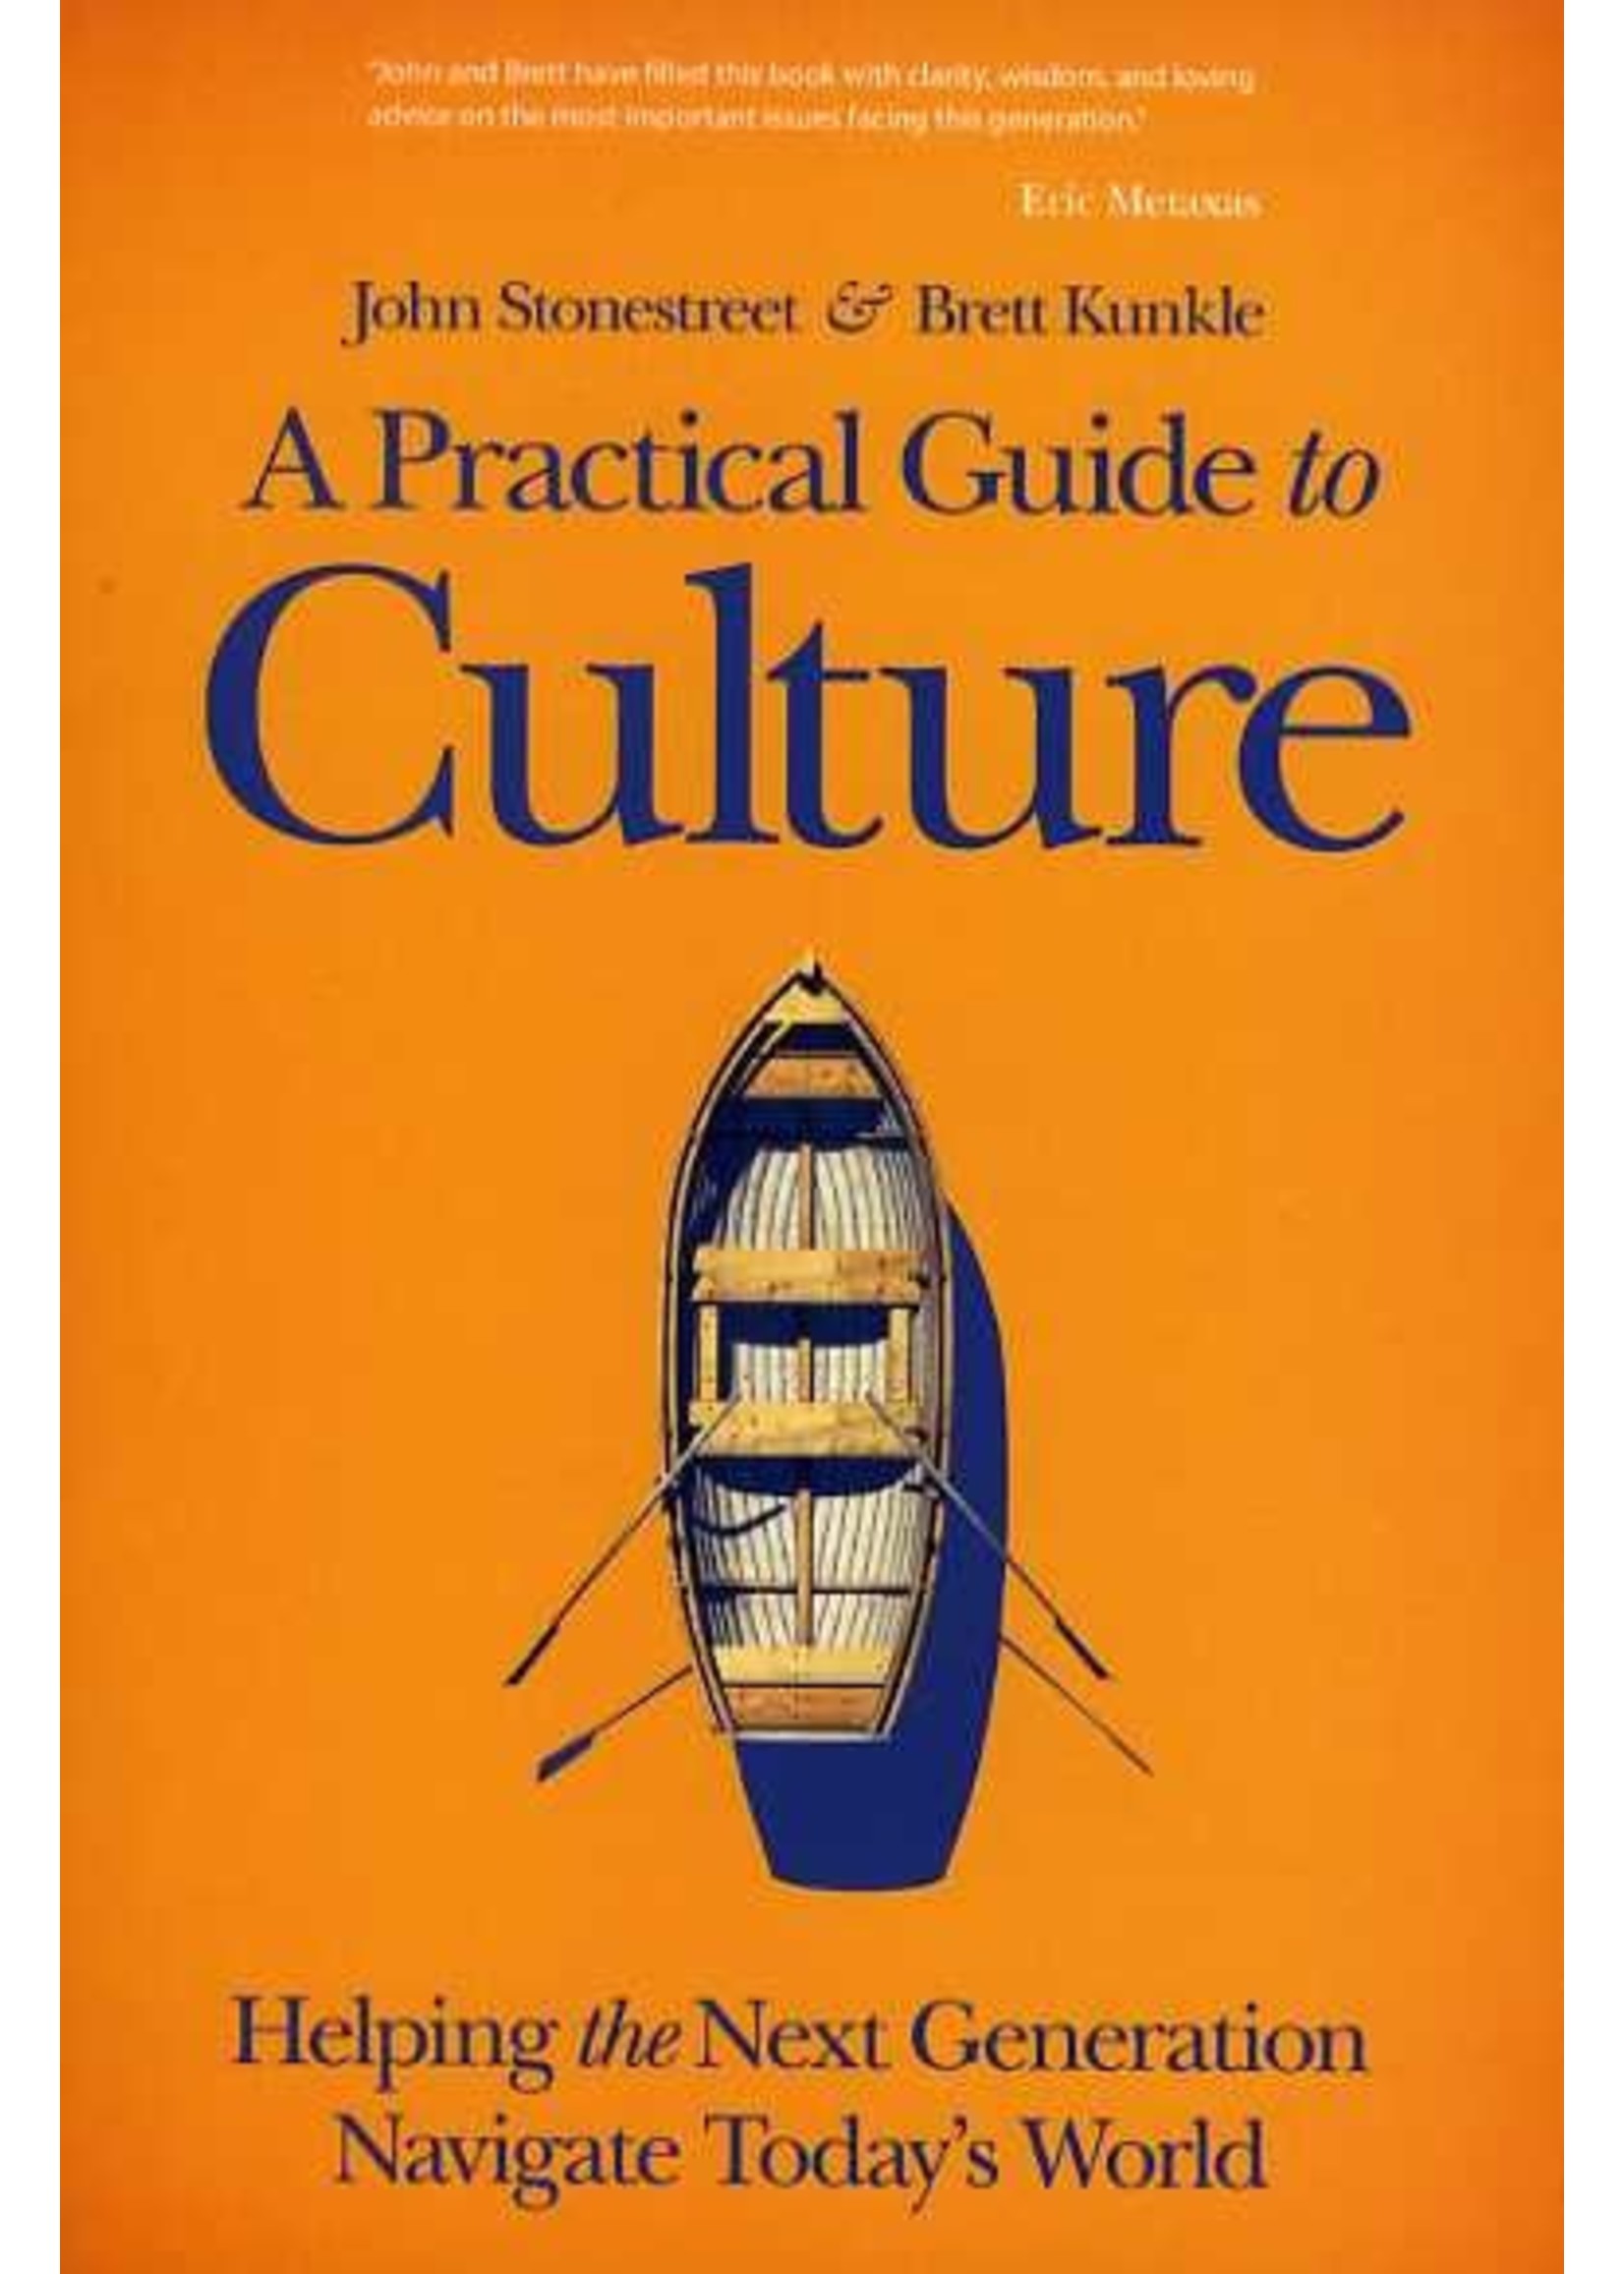 David C. Cook A Practical Guide to Culture - John Stonestreet and Brett Kunkle